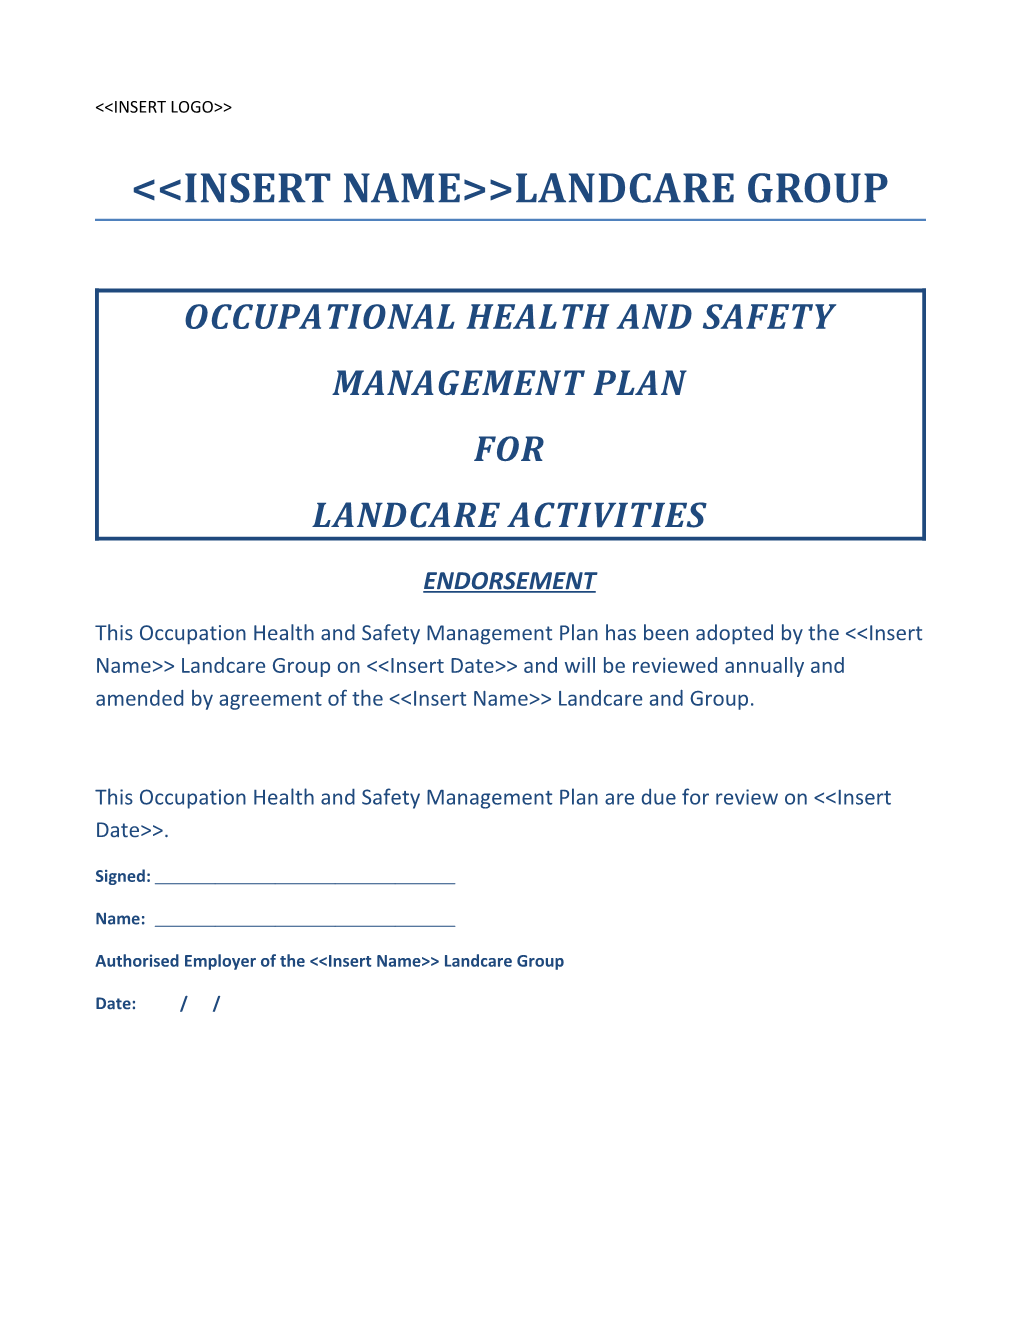 OHS Management Plan for GB Landcare and Community Groups